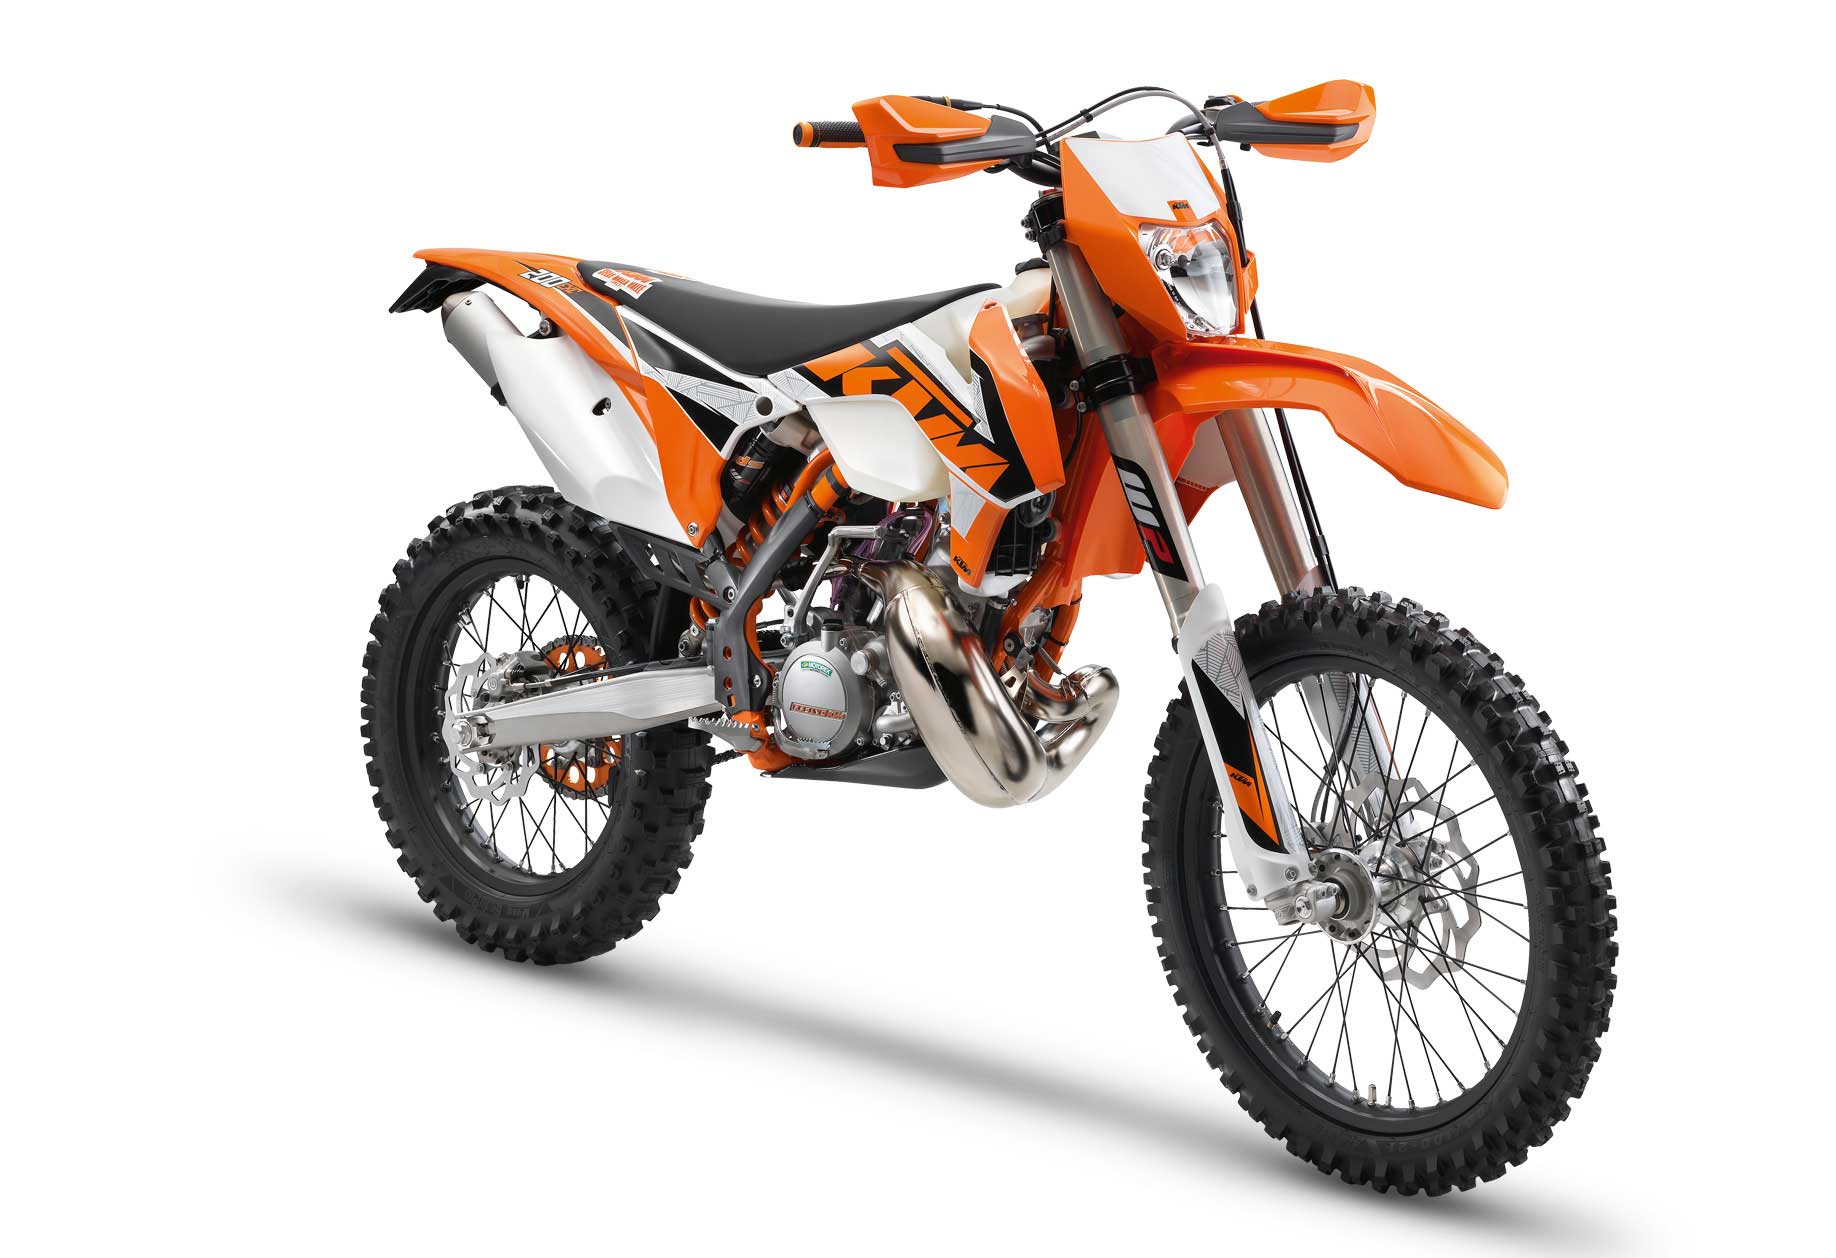 KTM 200 EXC front cross view